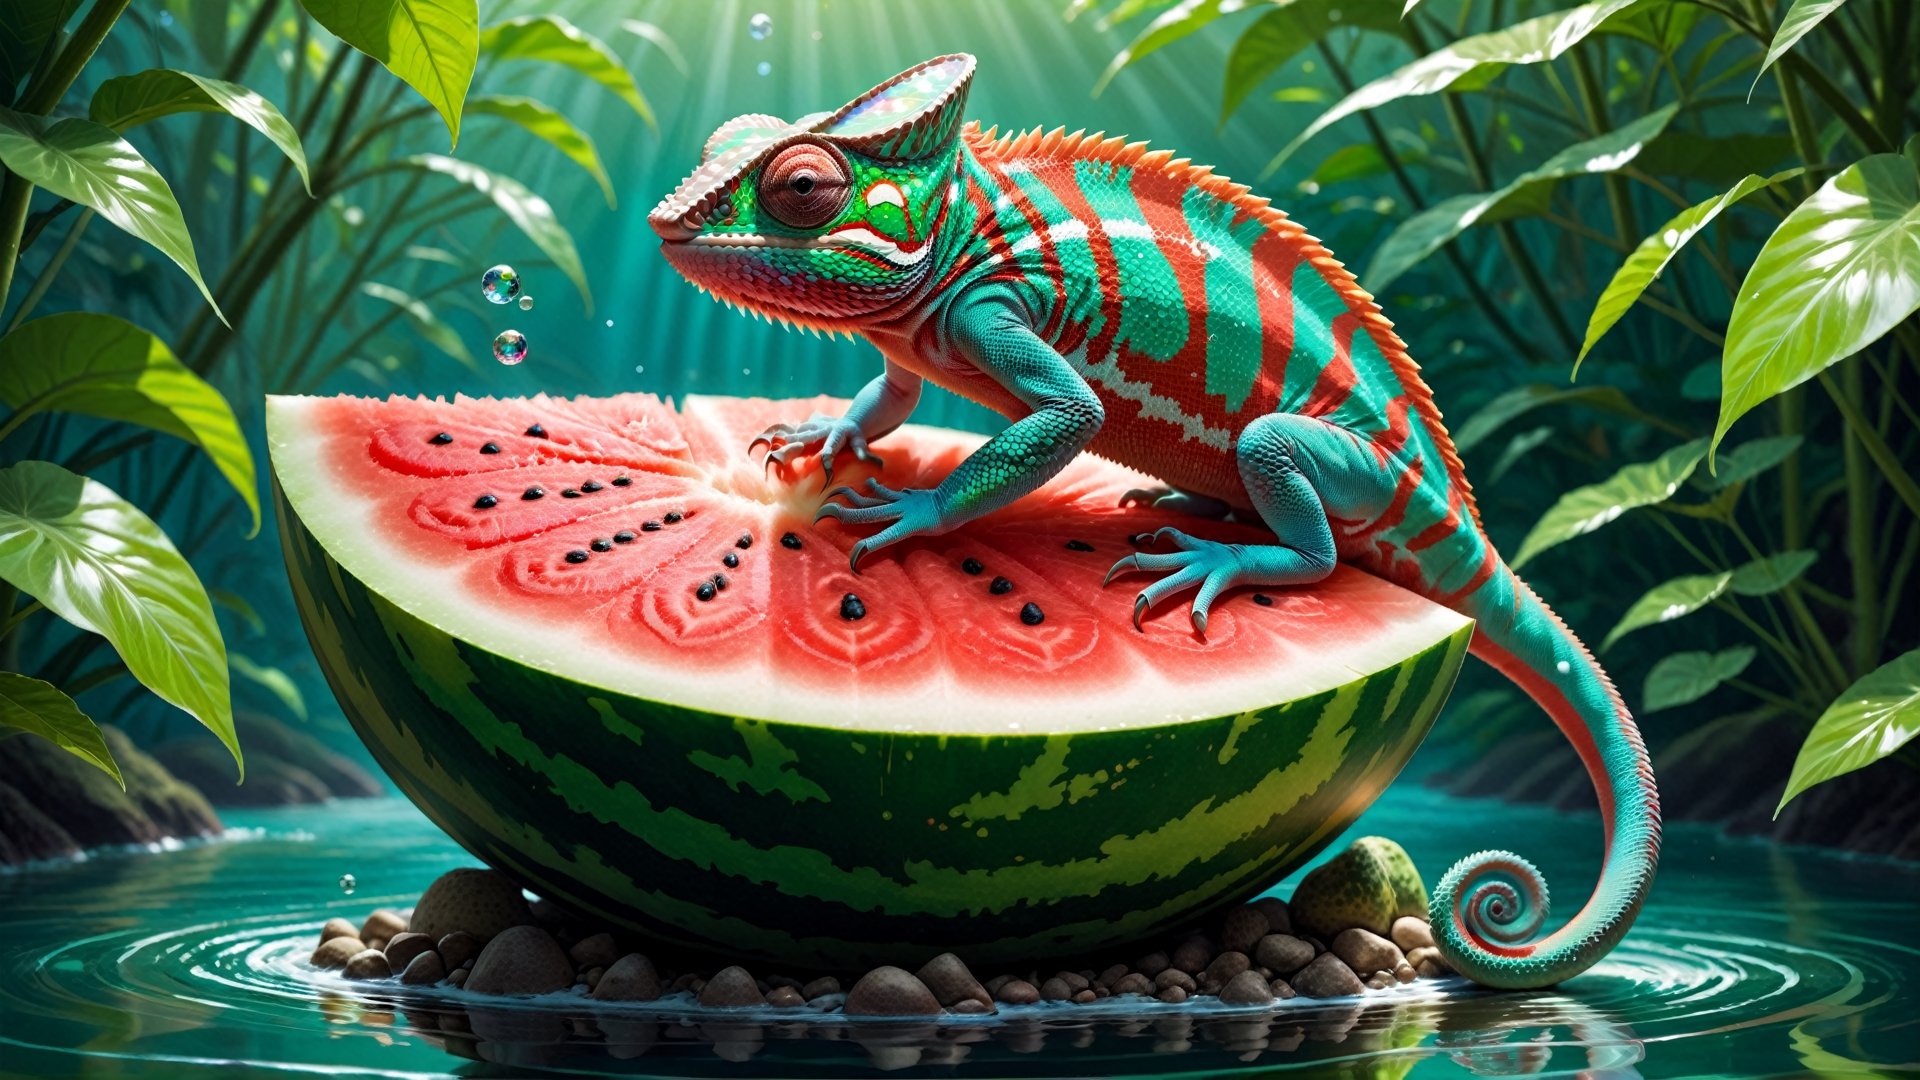 Imagine a delightful and picturesque scene: a beautiful and colorful chameleon perched gracefully on a watermelon, surrounded by a shimmering expanse of water. This prompt invites artists to capture the charm of this whimsical moment, portraying the vibrant hues of both the chameleon and the watermelon against the backdrop of a tranquil and colorful aquatic setting. The goal is to create an image that radiates beauty, playfulness, and a touch of magic.